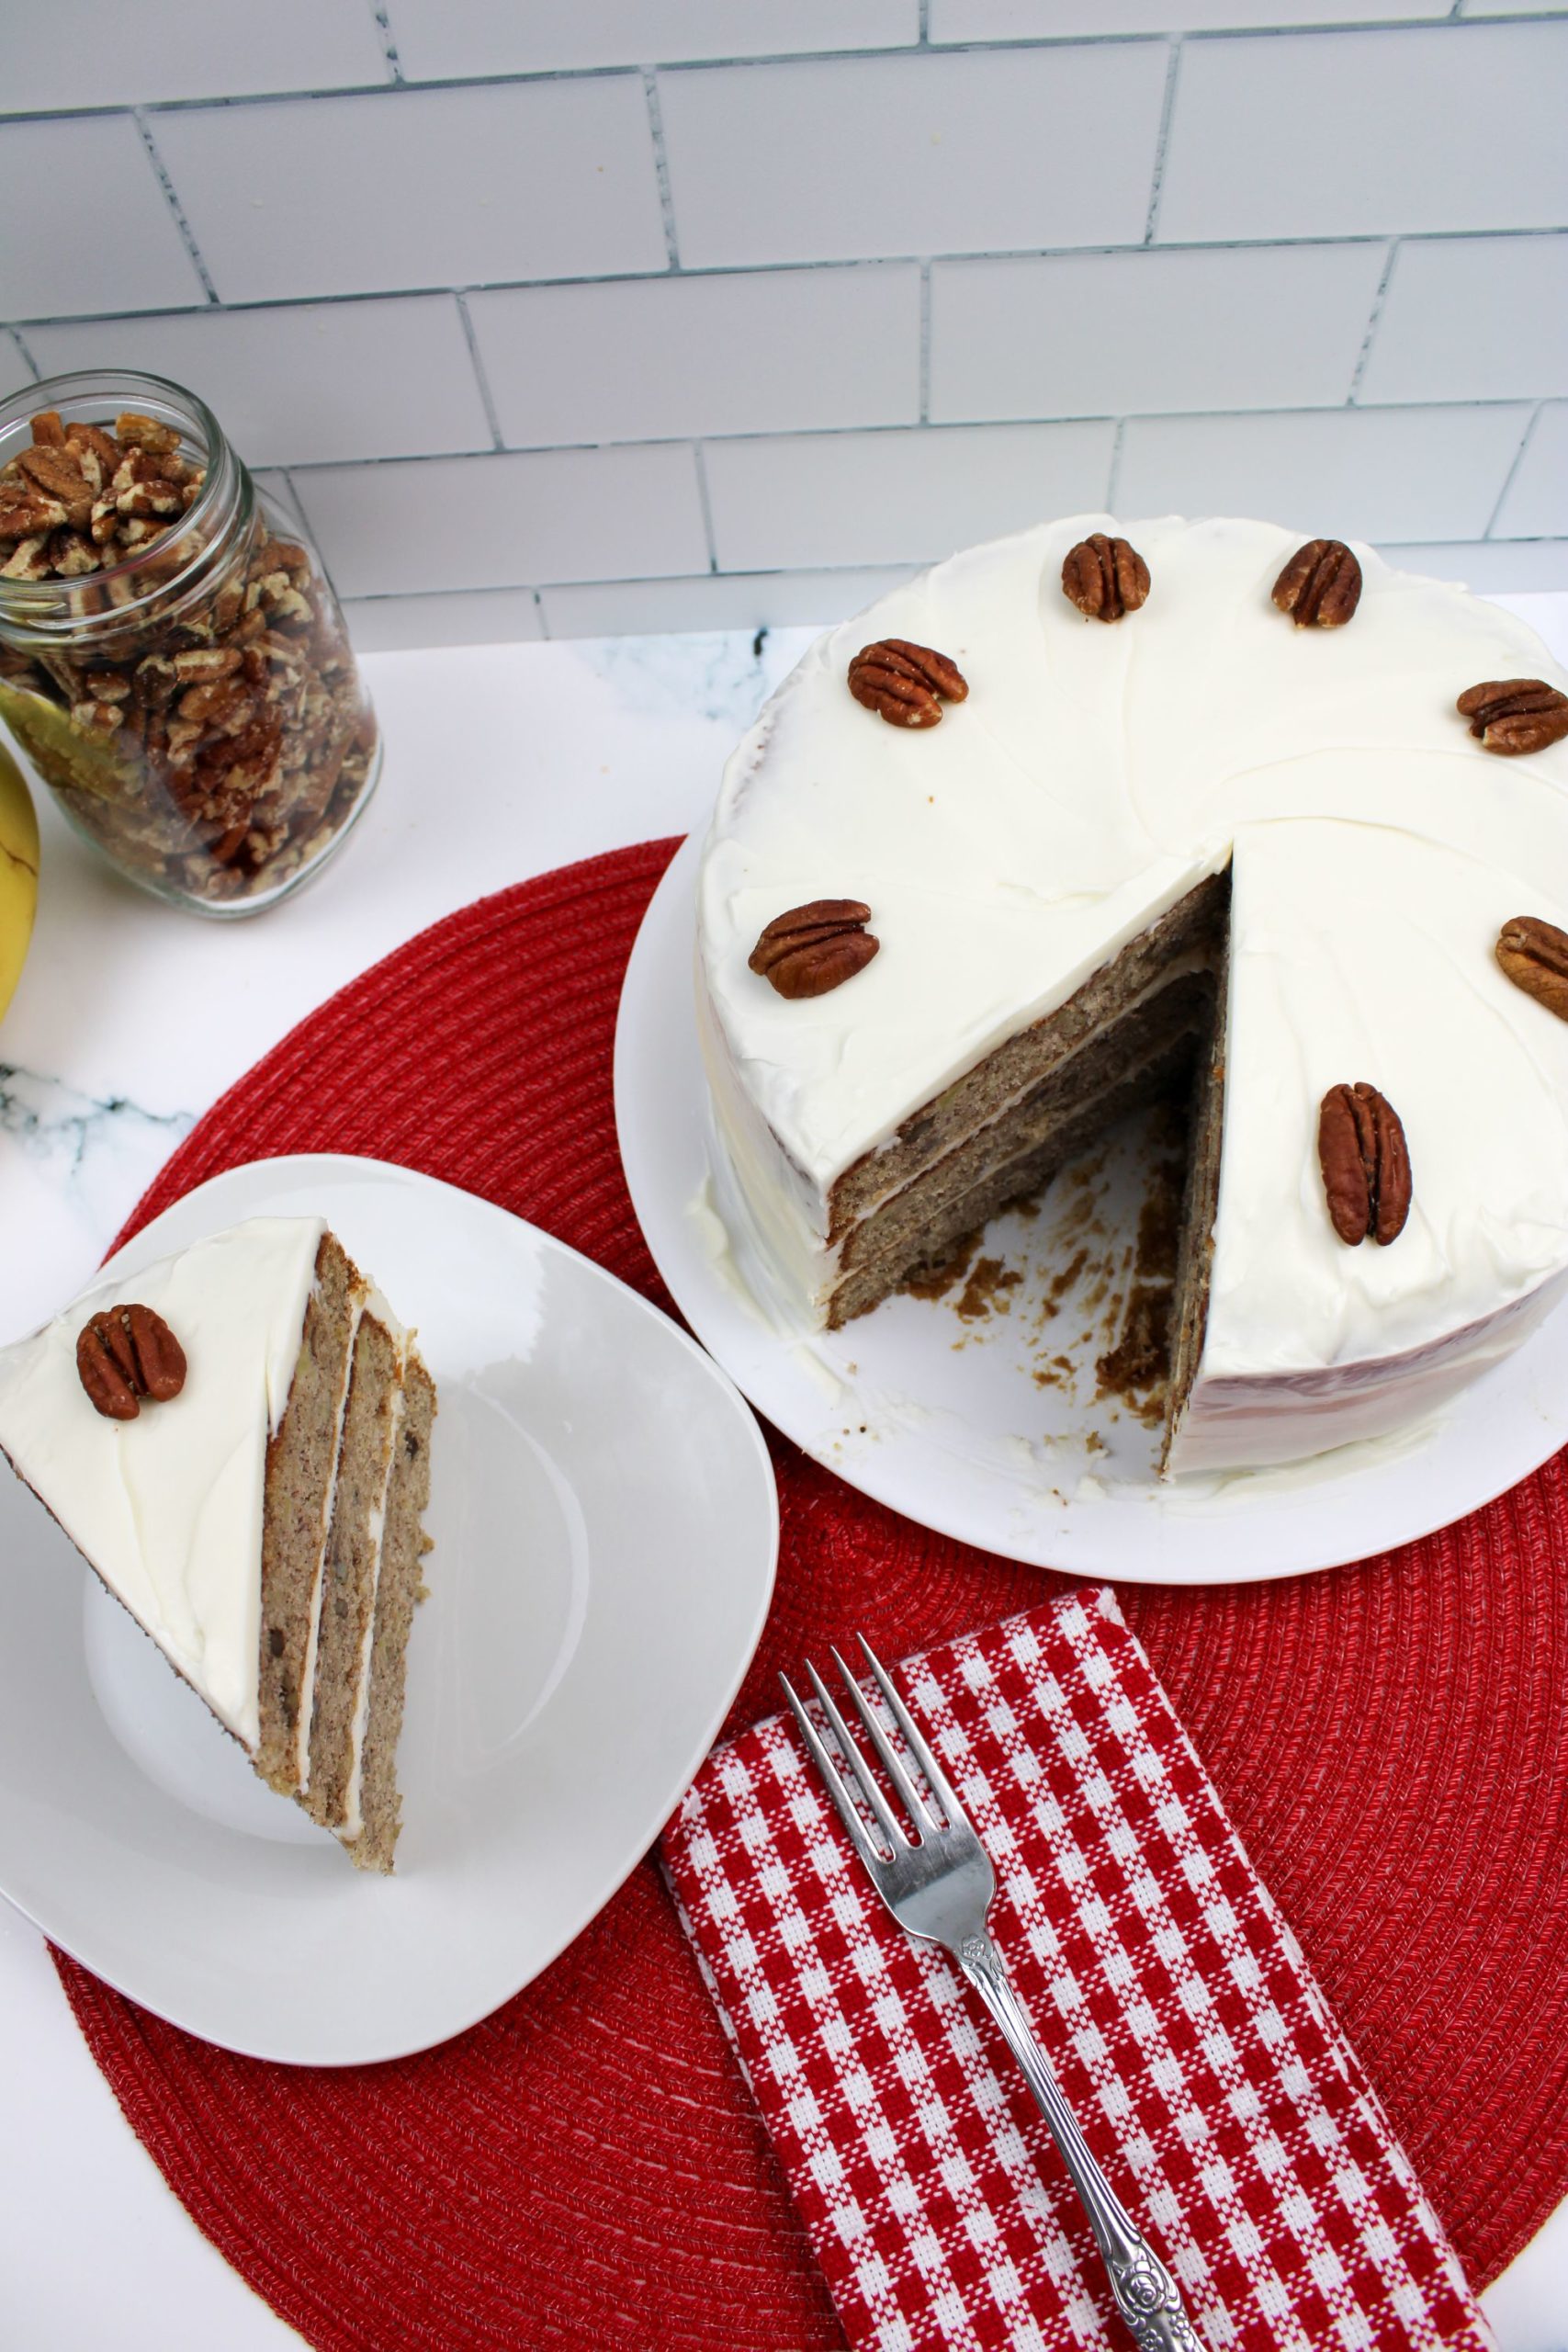 A sliced hummingbird cake with cream cheese frosting and whole pecans on top, displayed on a white plate with a red woven placemat.